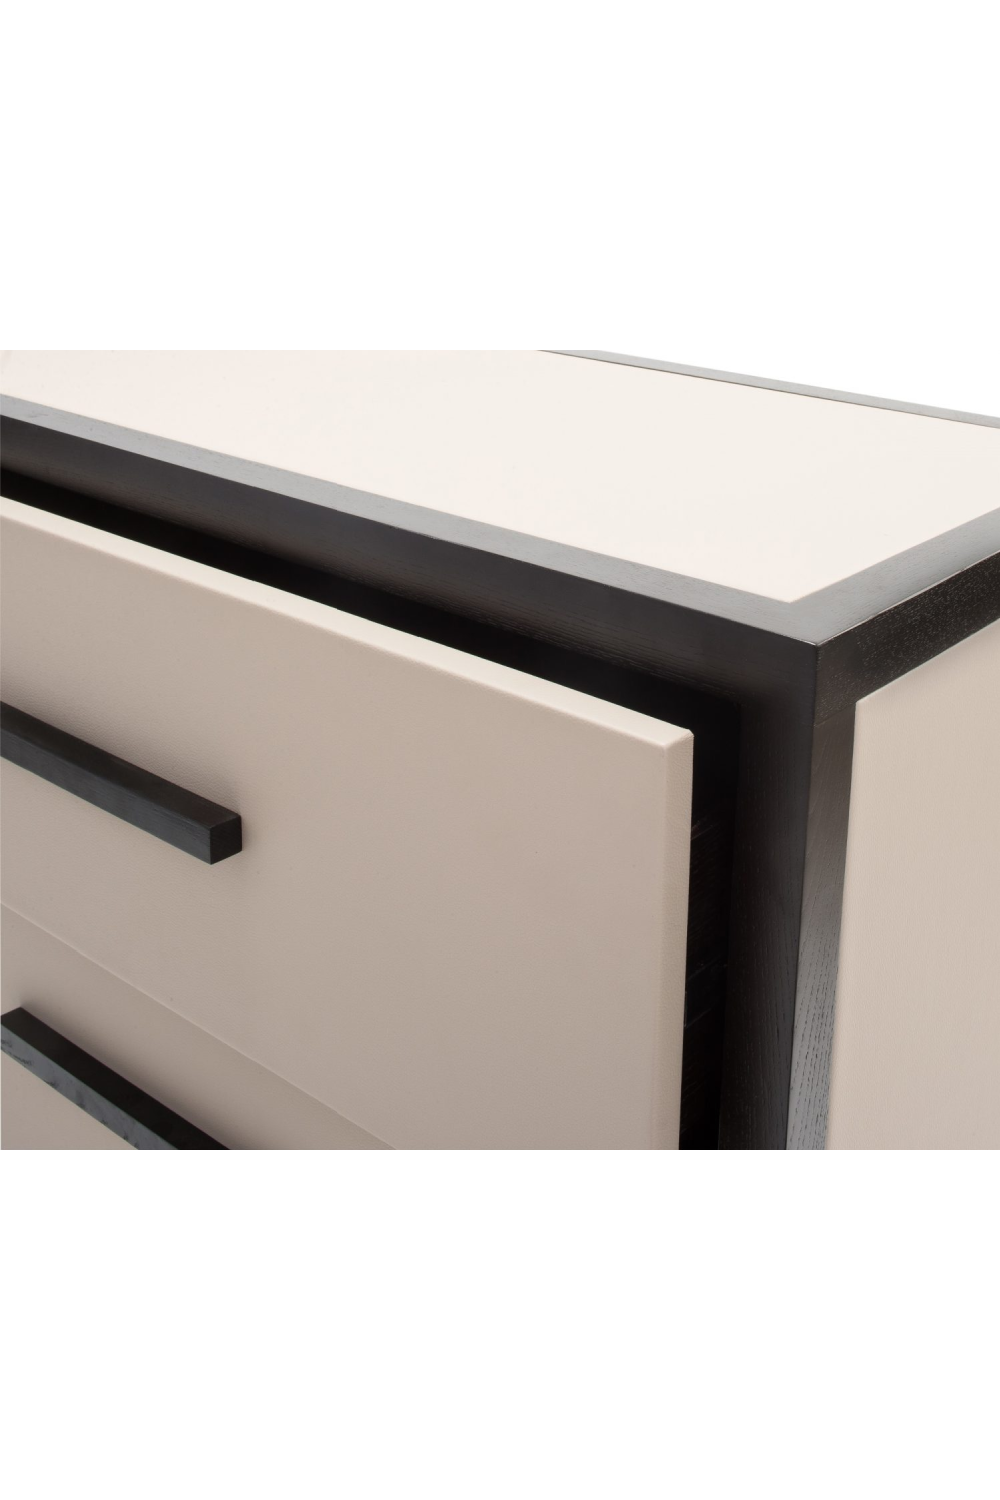 Beige Leather Chest of Drawers | Liang & Eimil Liza | OROA.com